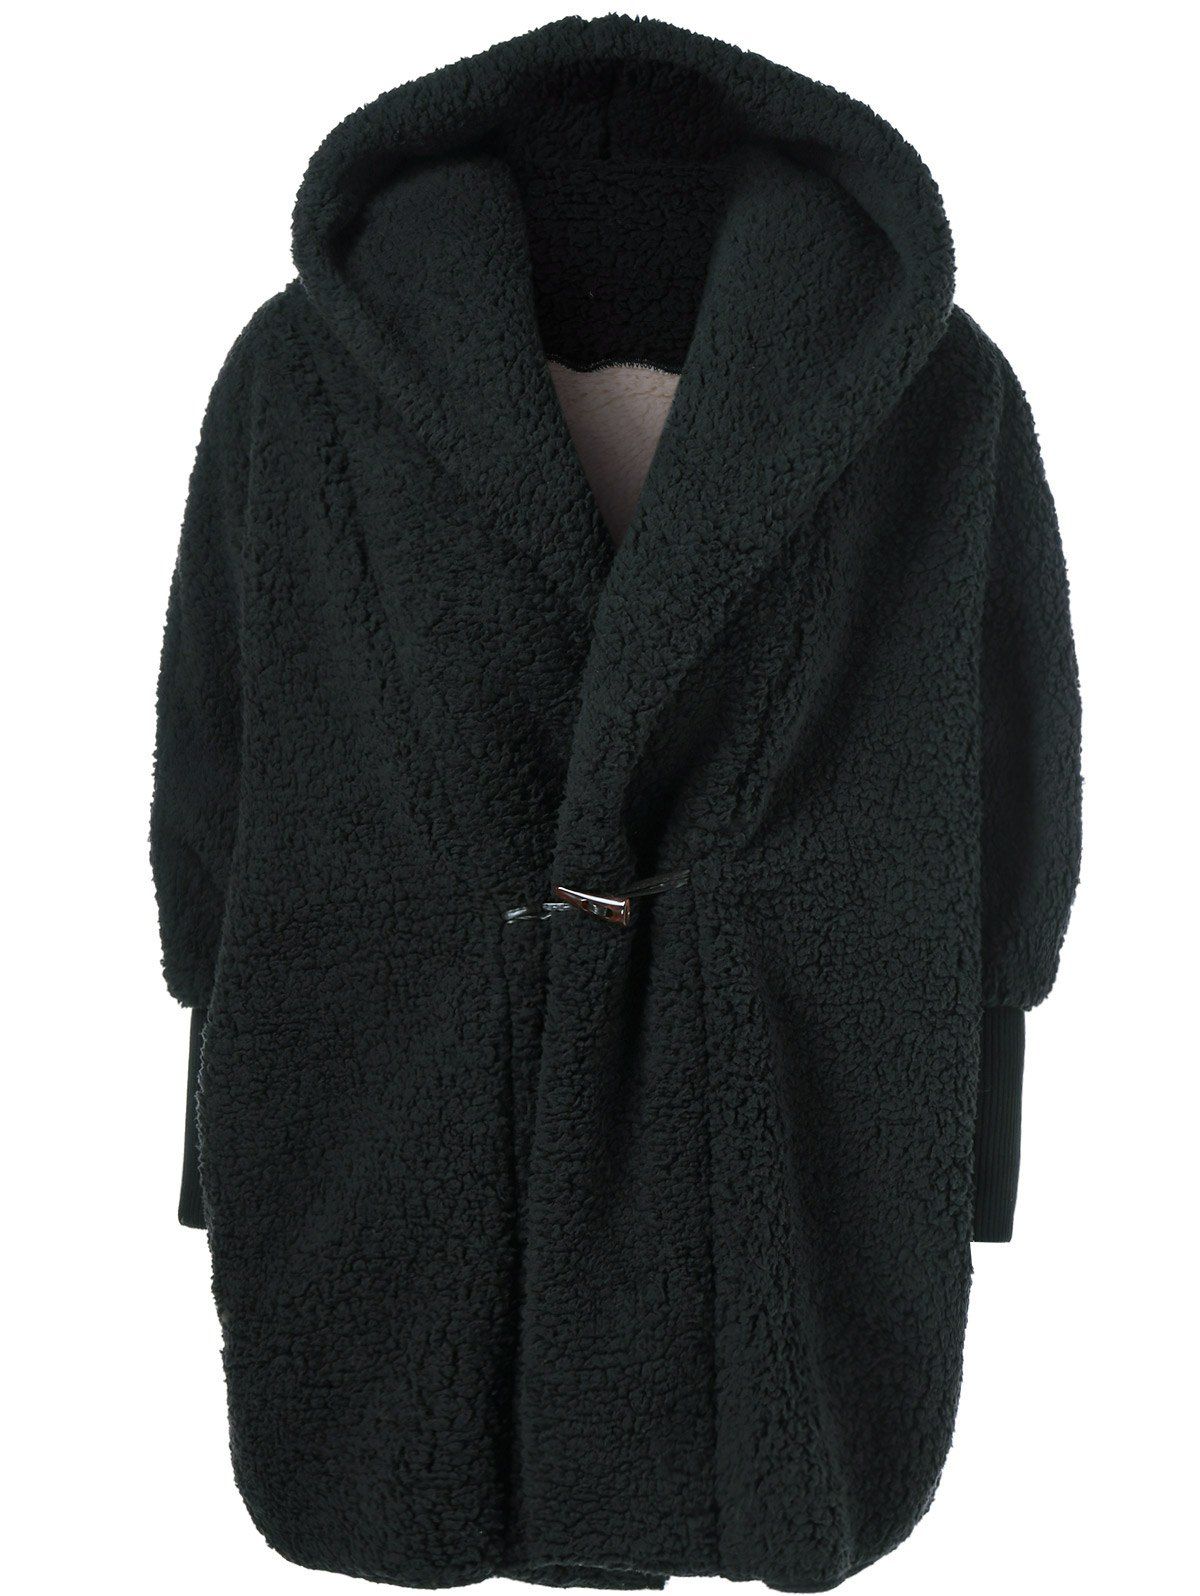 One Button Fuzzy Hooded Coat - BLACK ONE SIZE